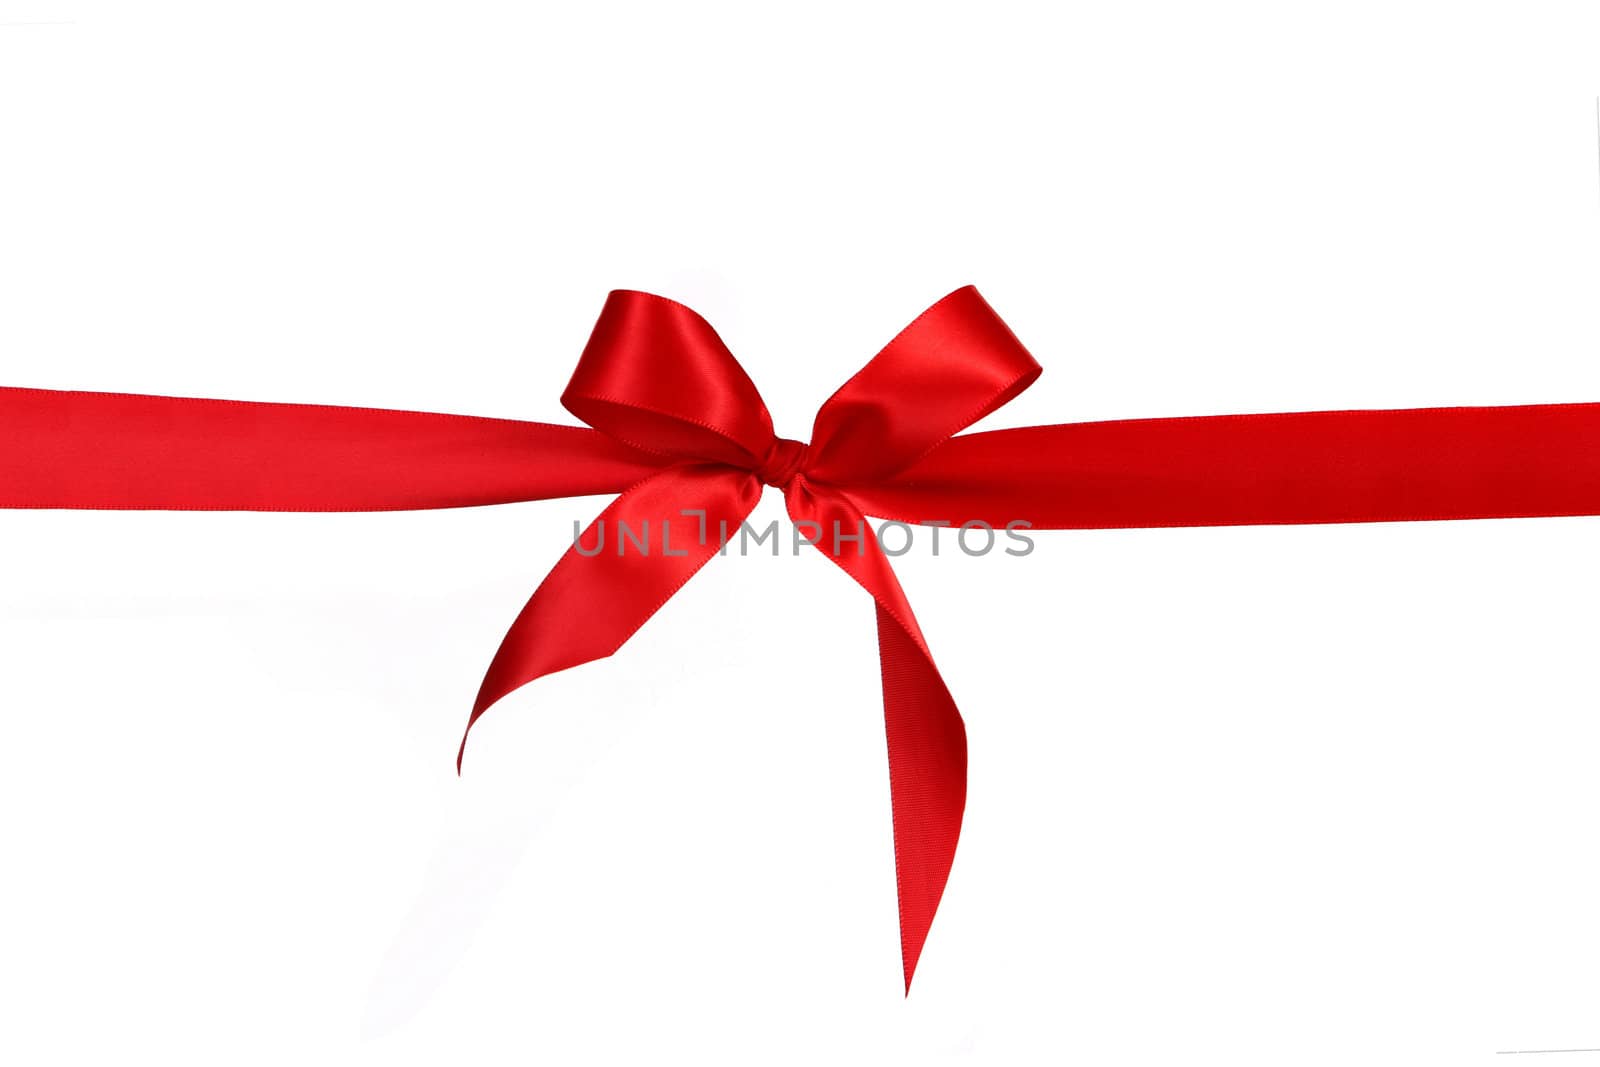 Red Gift Ribbon Bow in Horizontal Placement Over White Background Easily Isolated for Your Project